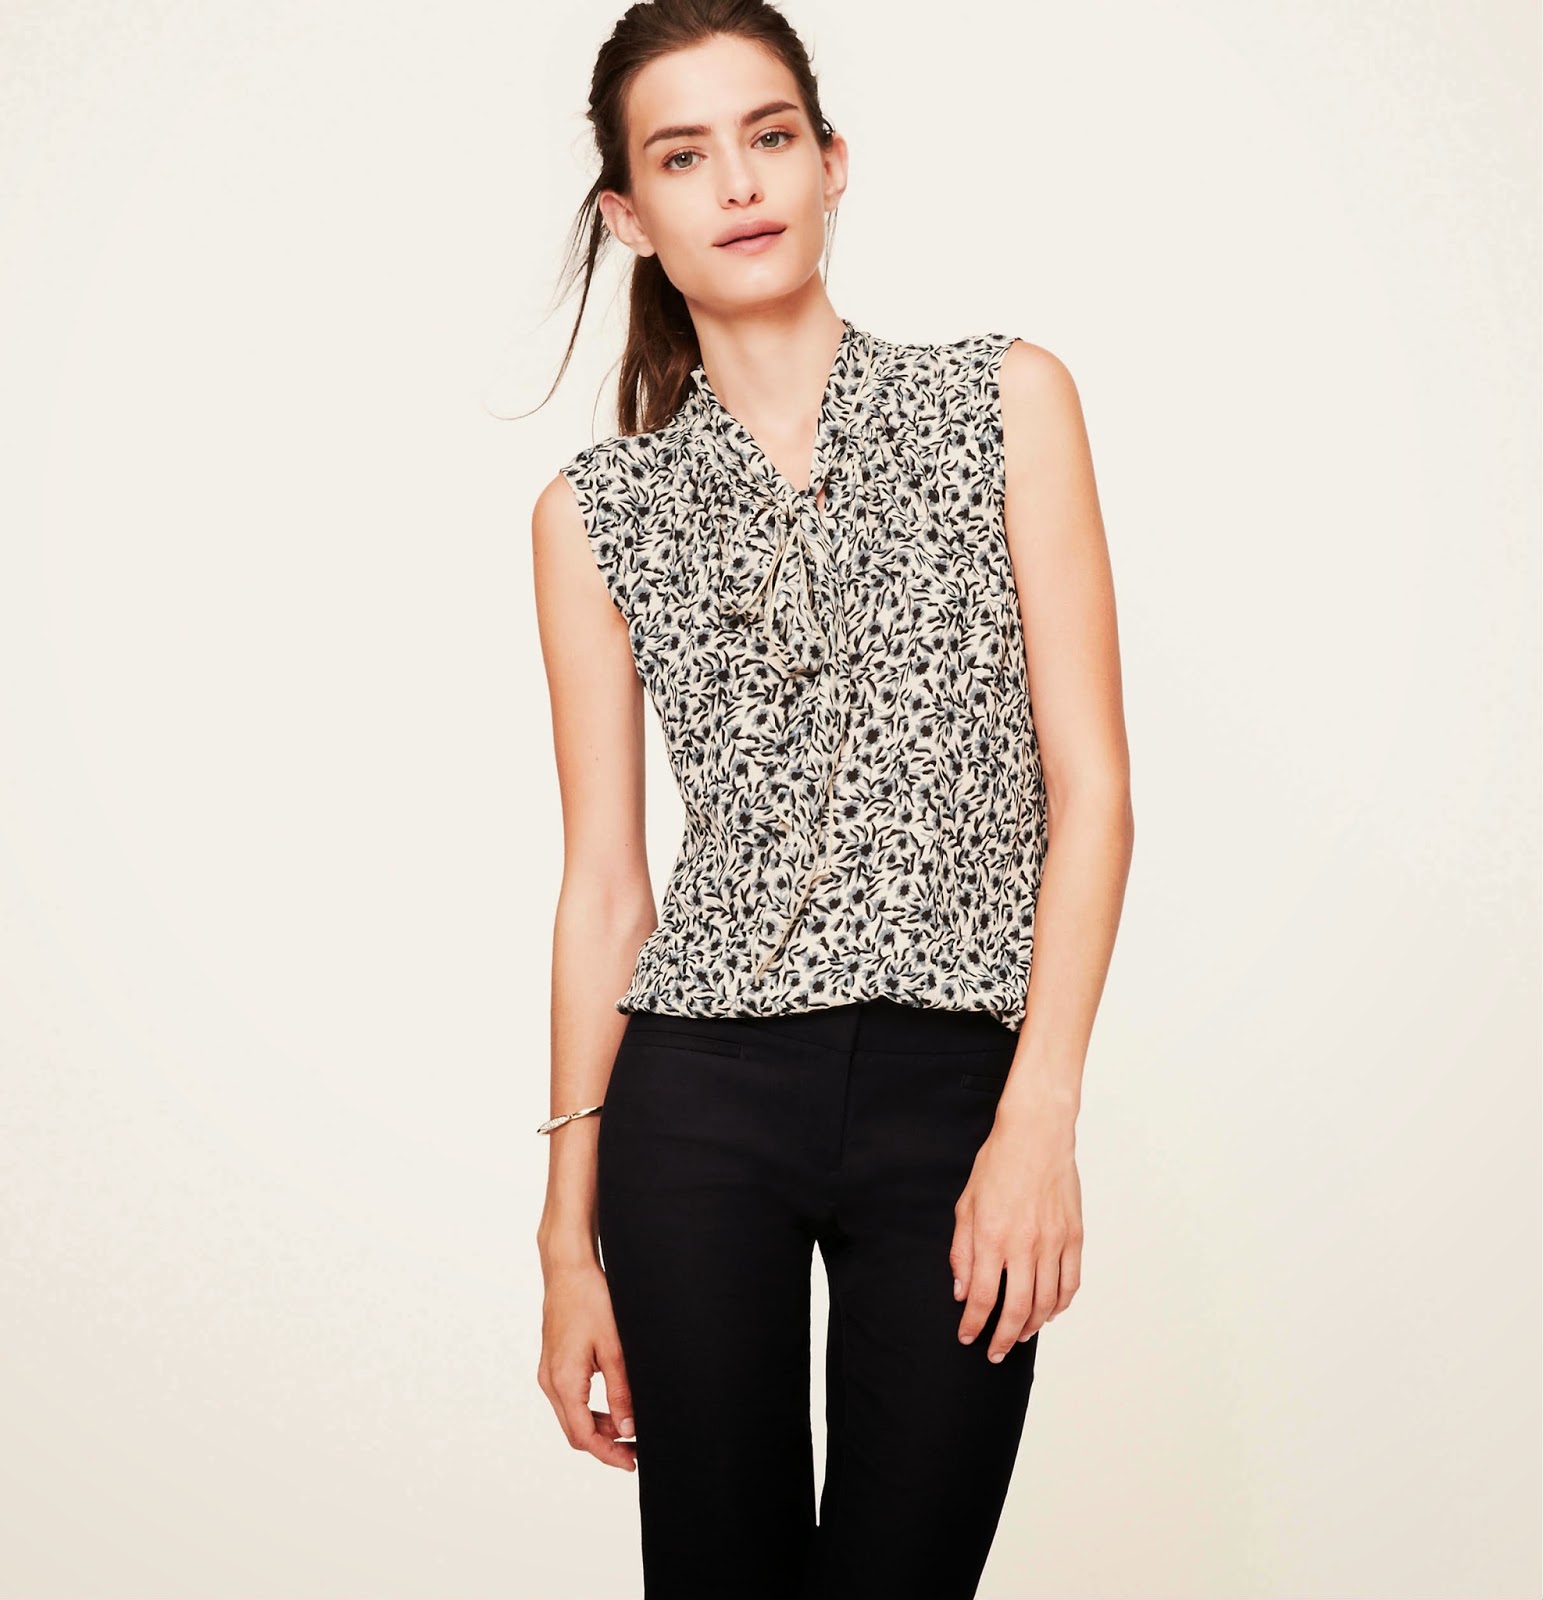 NYC Recessionista: NEW ARRIVALS: Early Fall at LOFT